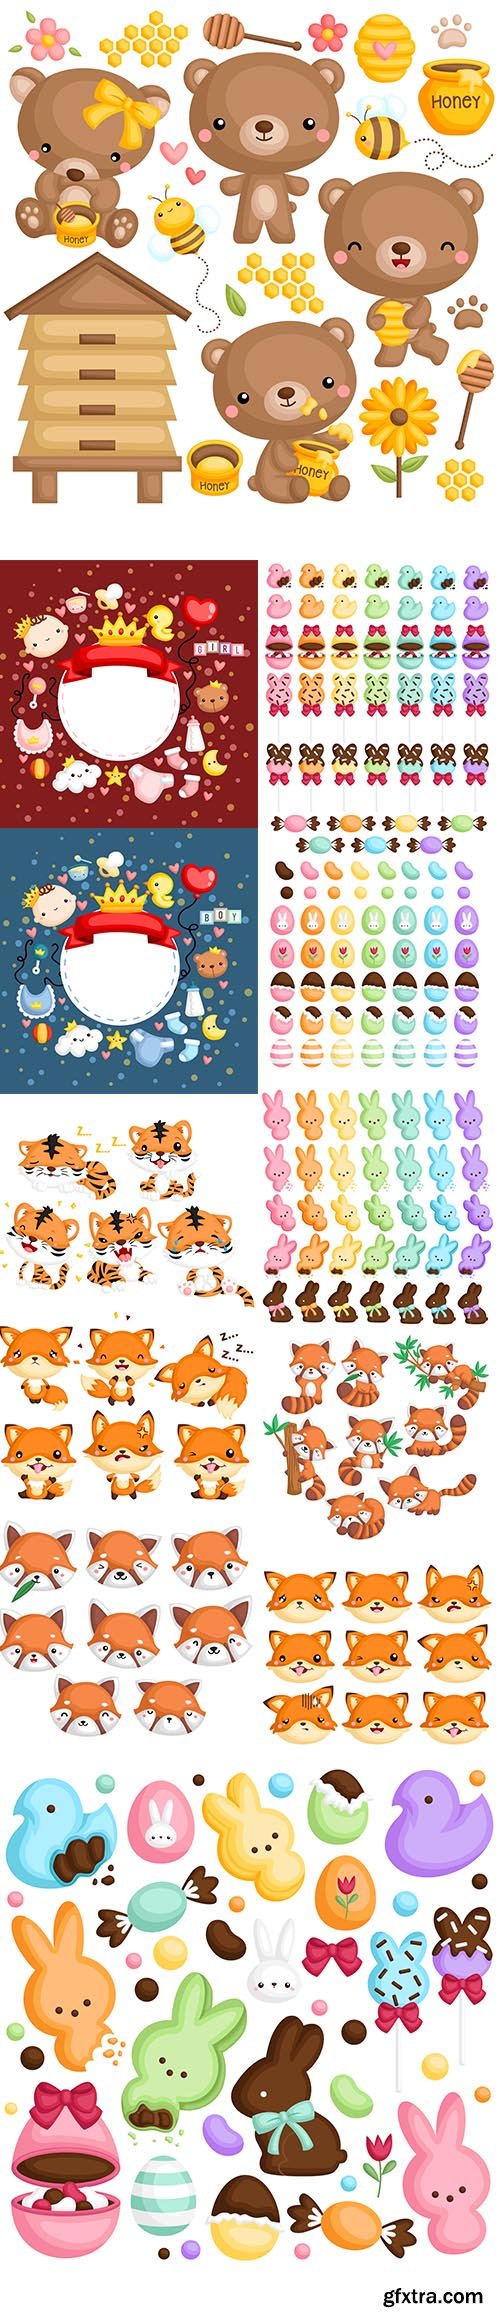 Collection of Cute Animals, Easter eggs and Child Object